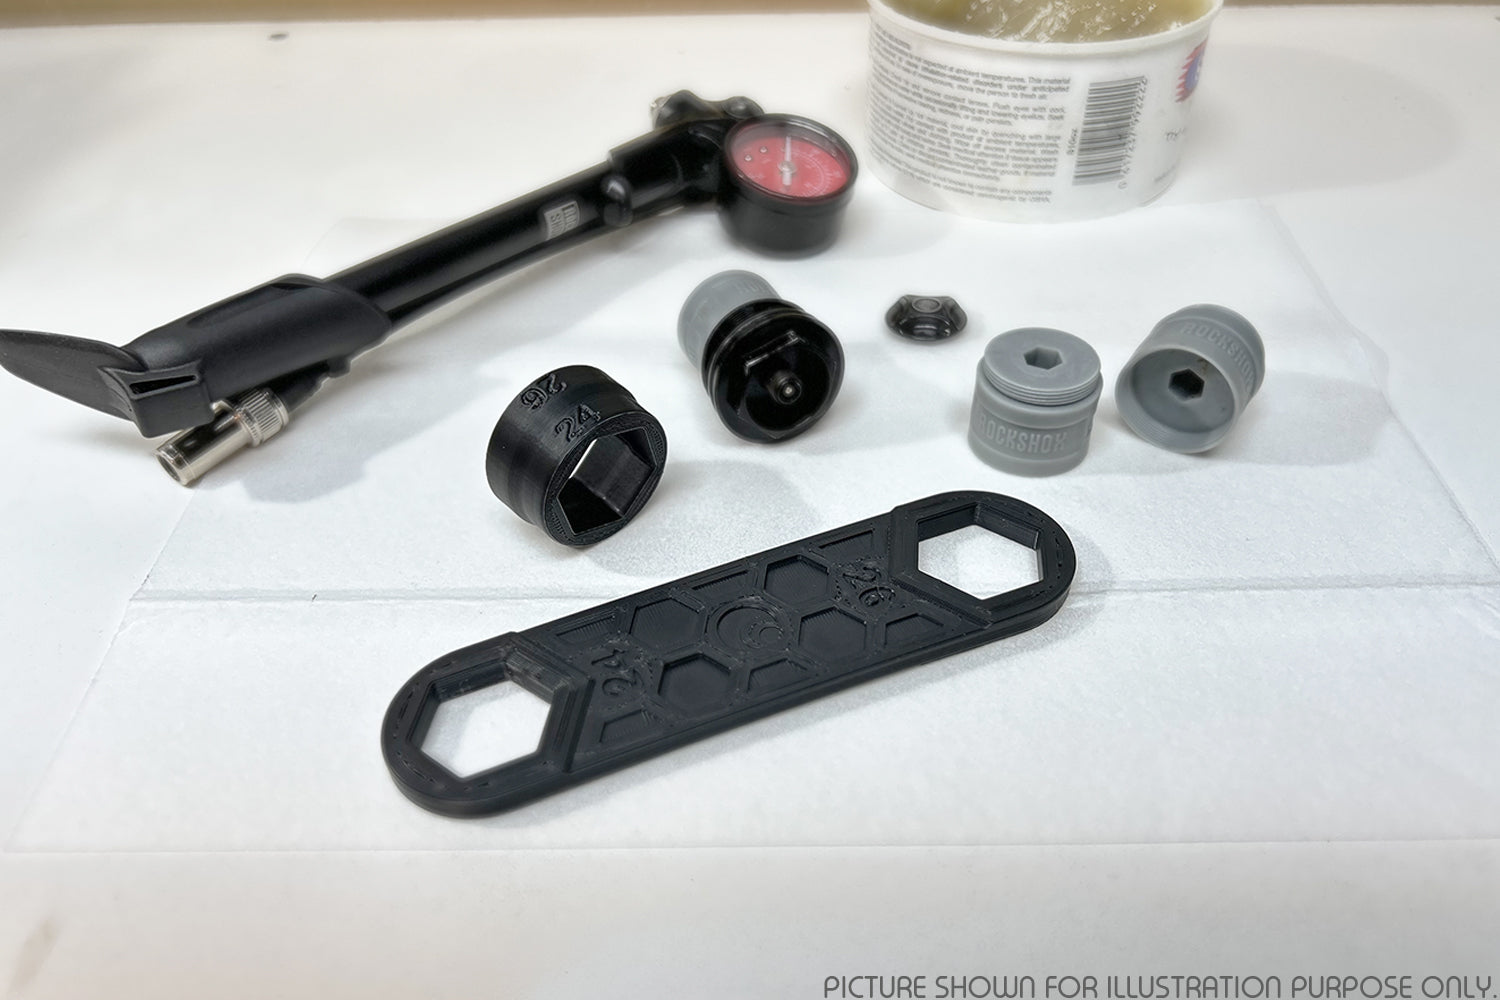 Our 3D printed MTB fork Flat Spanner and Hand Socket Tools being used to play with a MTB fork setup. Proudly made in Canada.